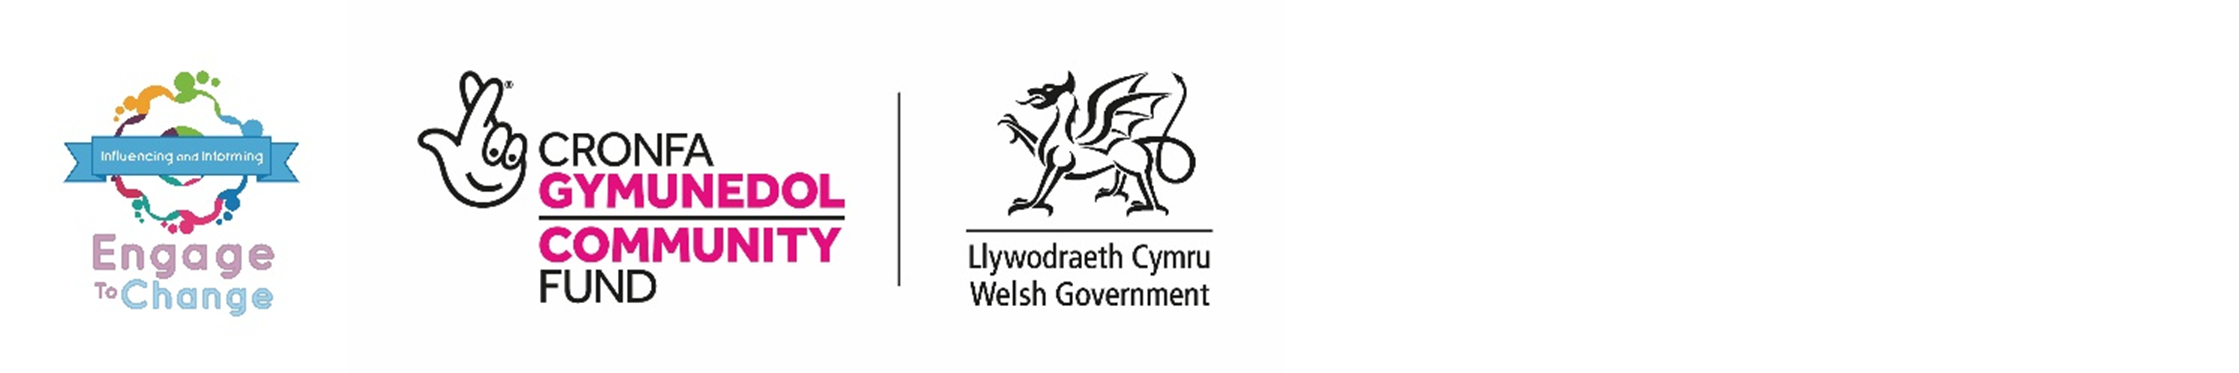 Logos for Engage to Change, Welsh Government and National Lottery Community Fund